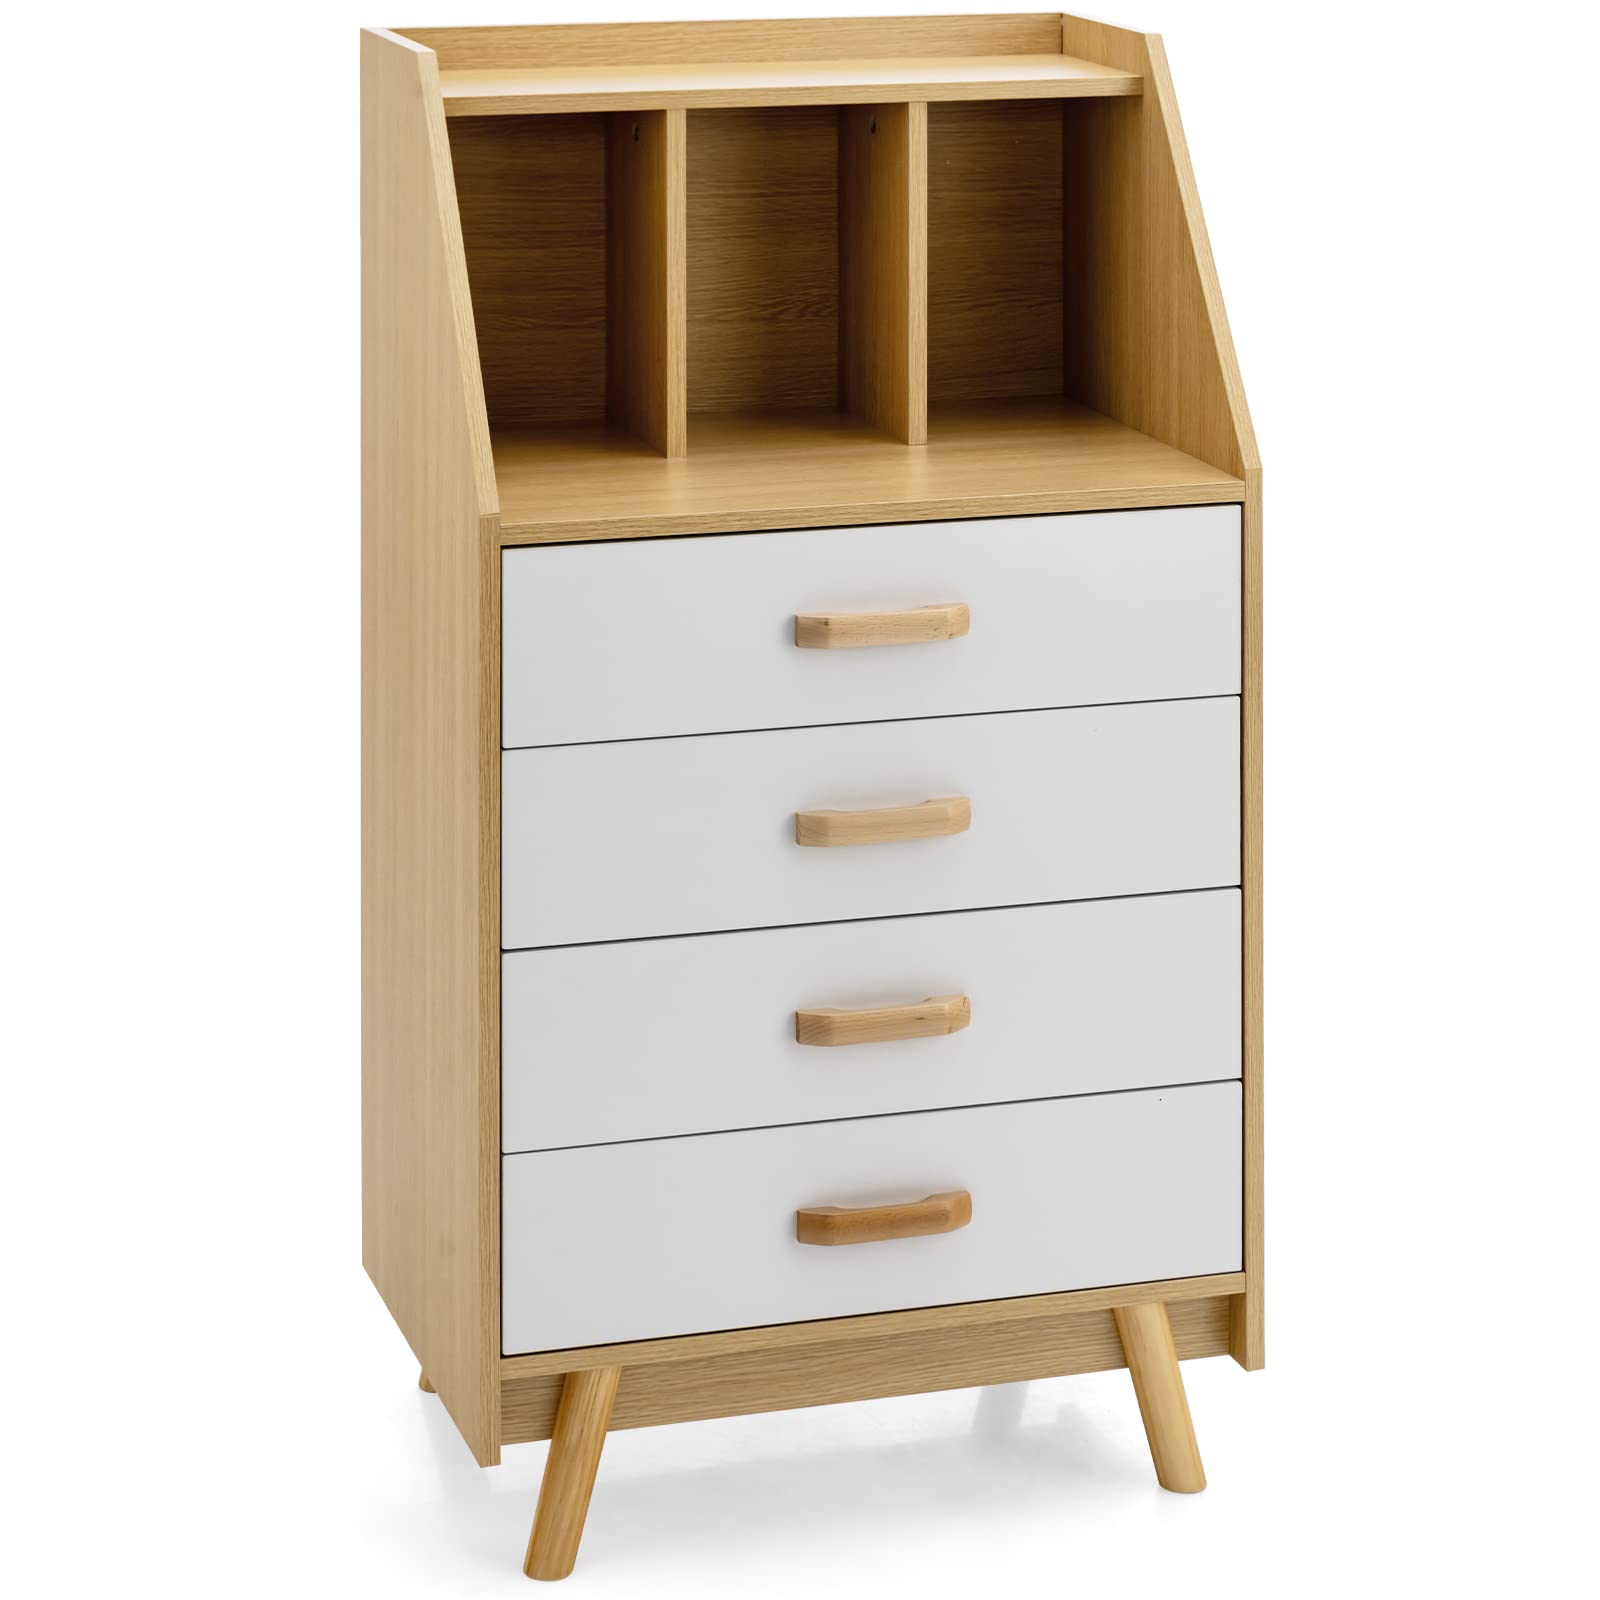 Giantex 4-Drawer Dresser Storage Cabinet - Freestanding Chest of Drawers with Countertop